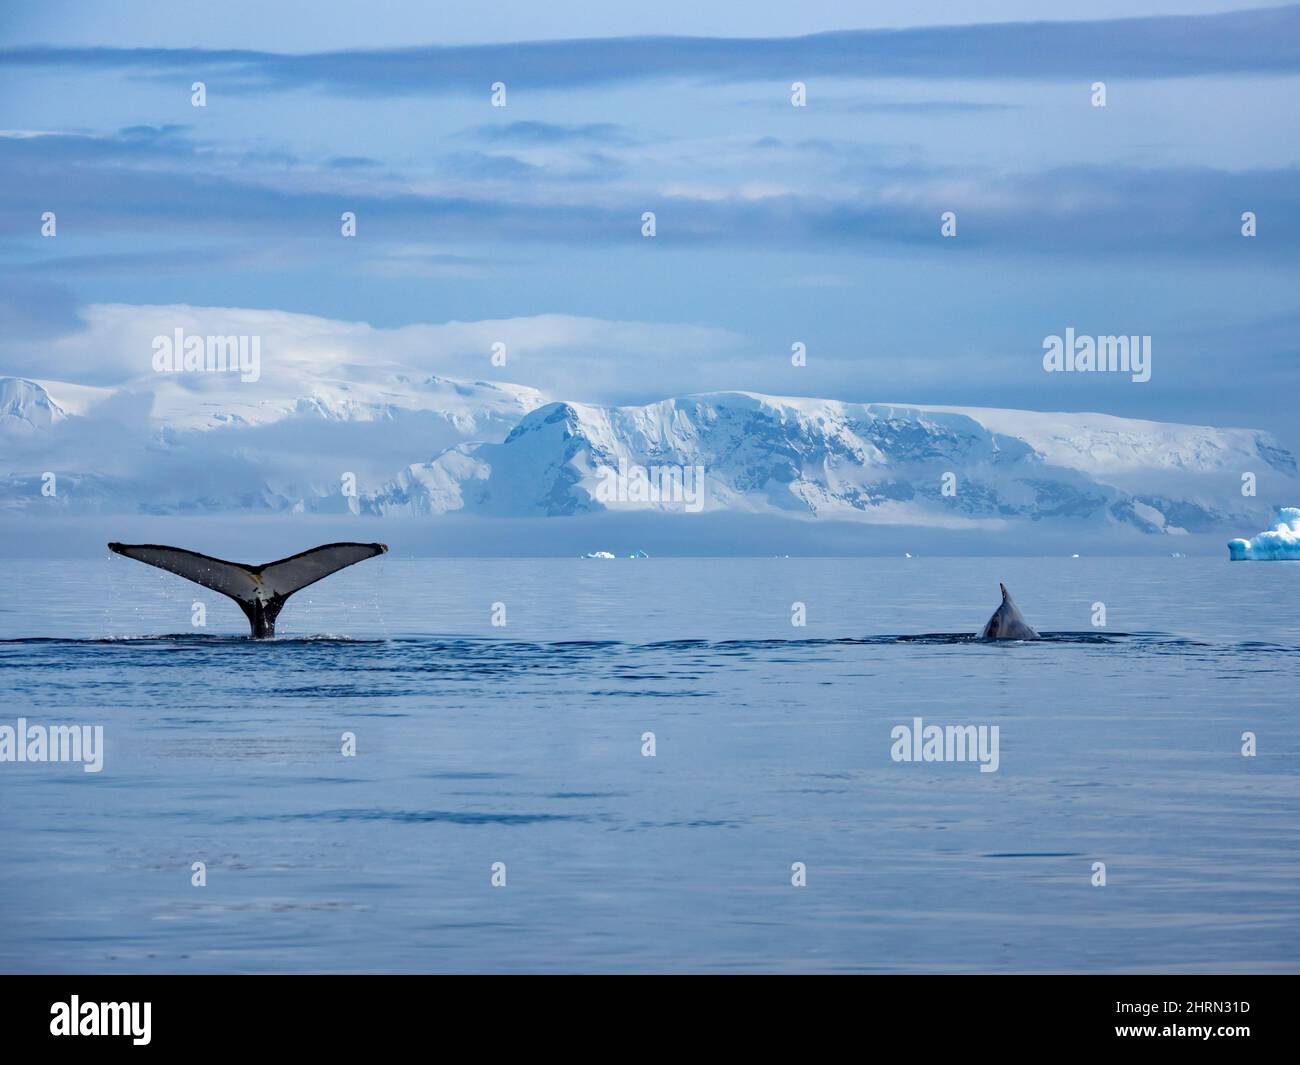 A Humpback whale, Megaptera novaeangliae in a sheltered bay with glaciers along the peninsula of Antarctica Stock Photo